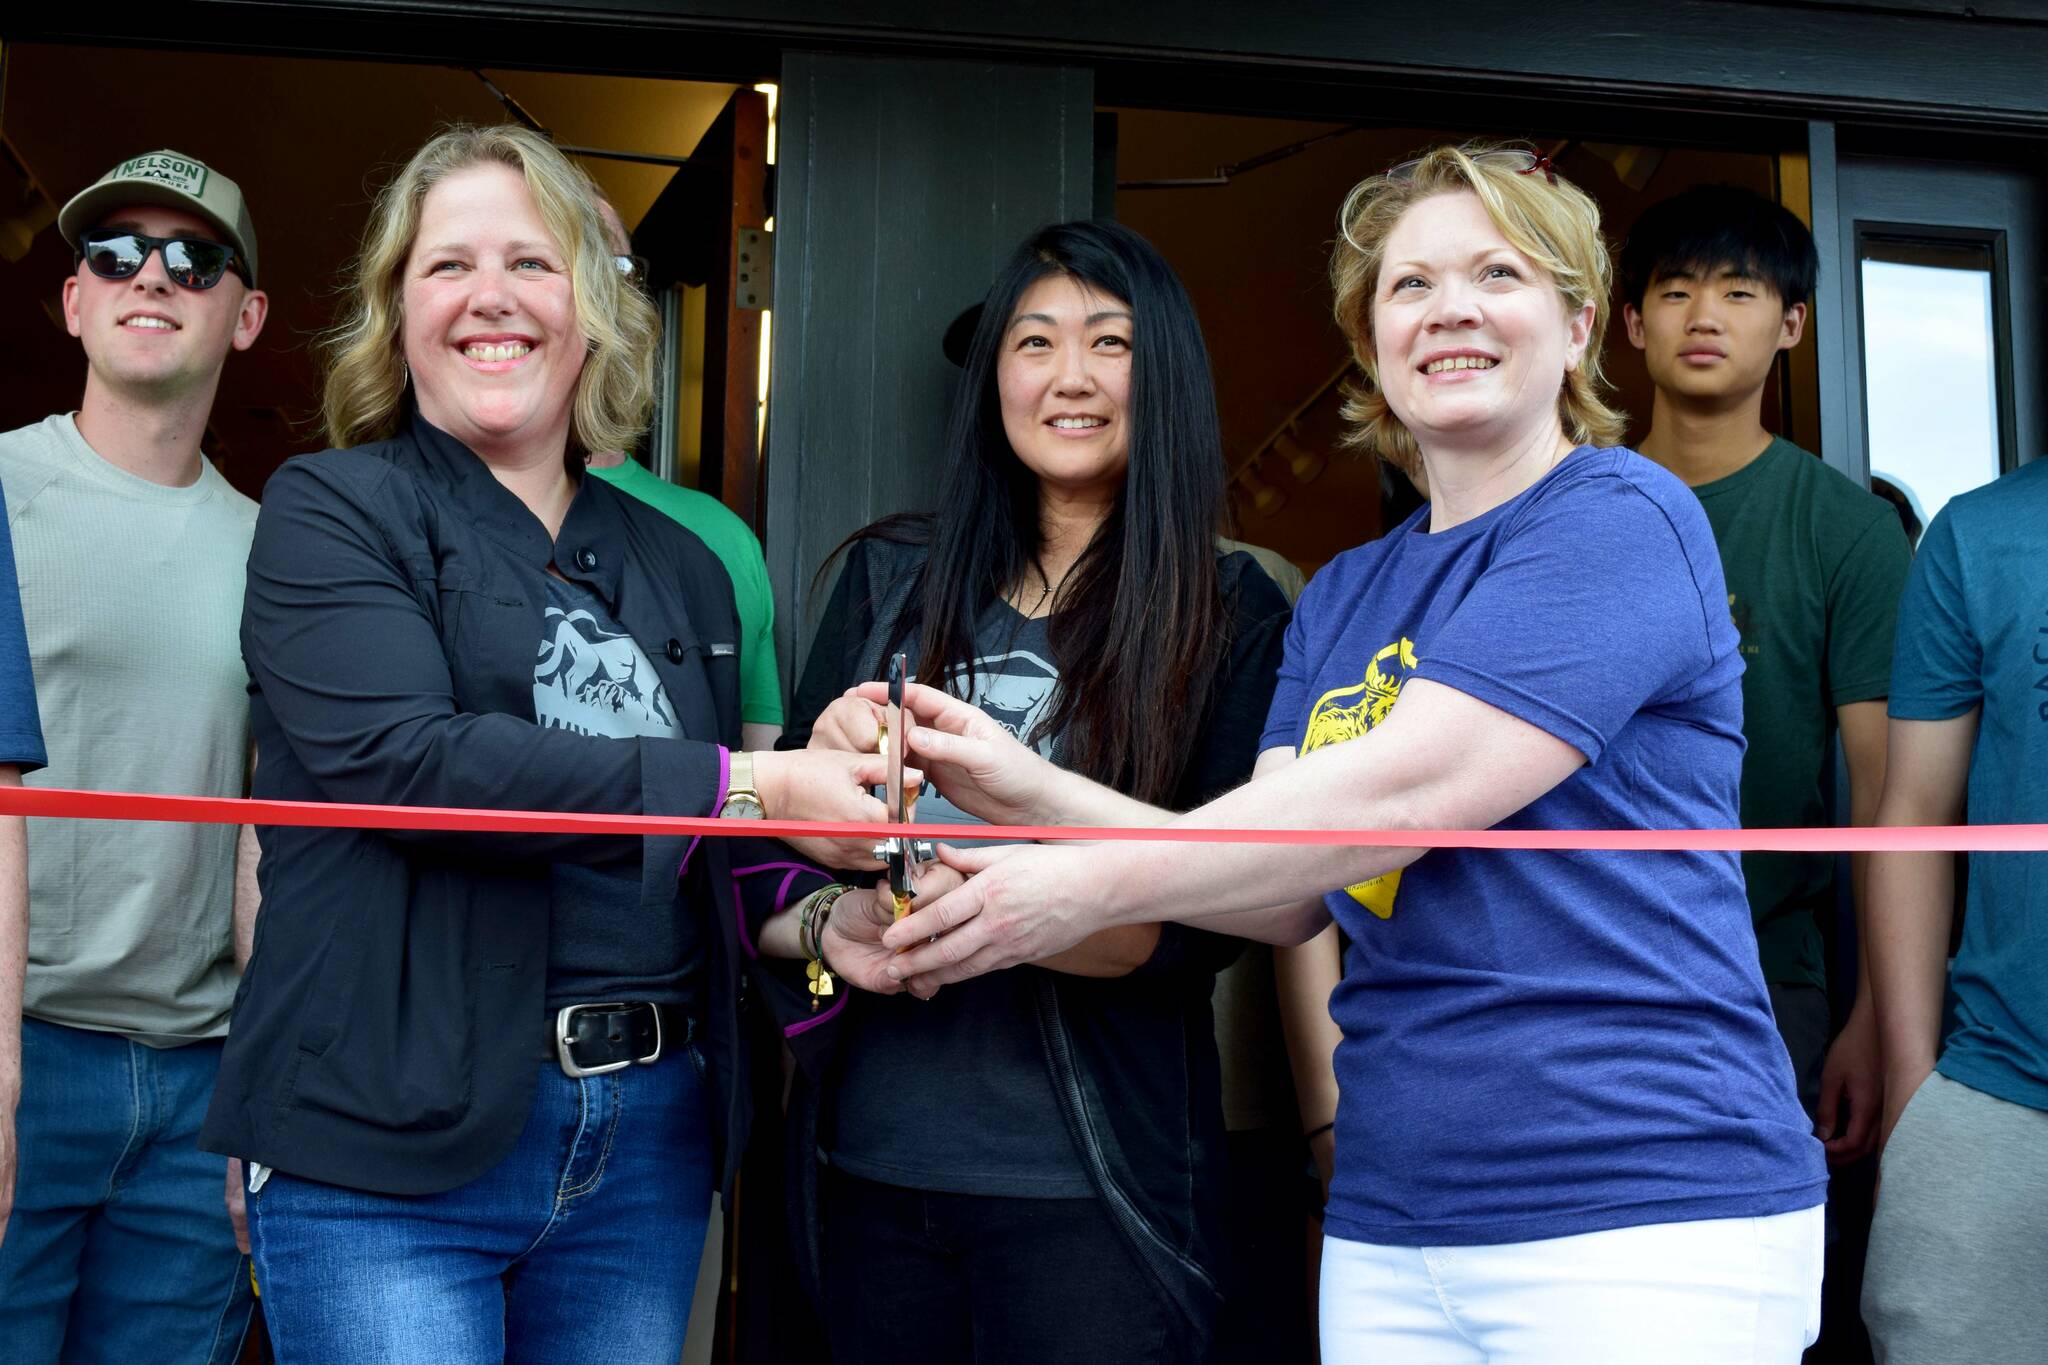 North Bend Trading Co. owners Cheri Buell, Julie Chung, Heather Dean celebrate the opening of their new business with a ribbon cutting ceremony on June 8. Photo by Conor Wilson/Valley Record.